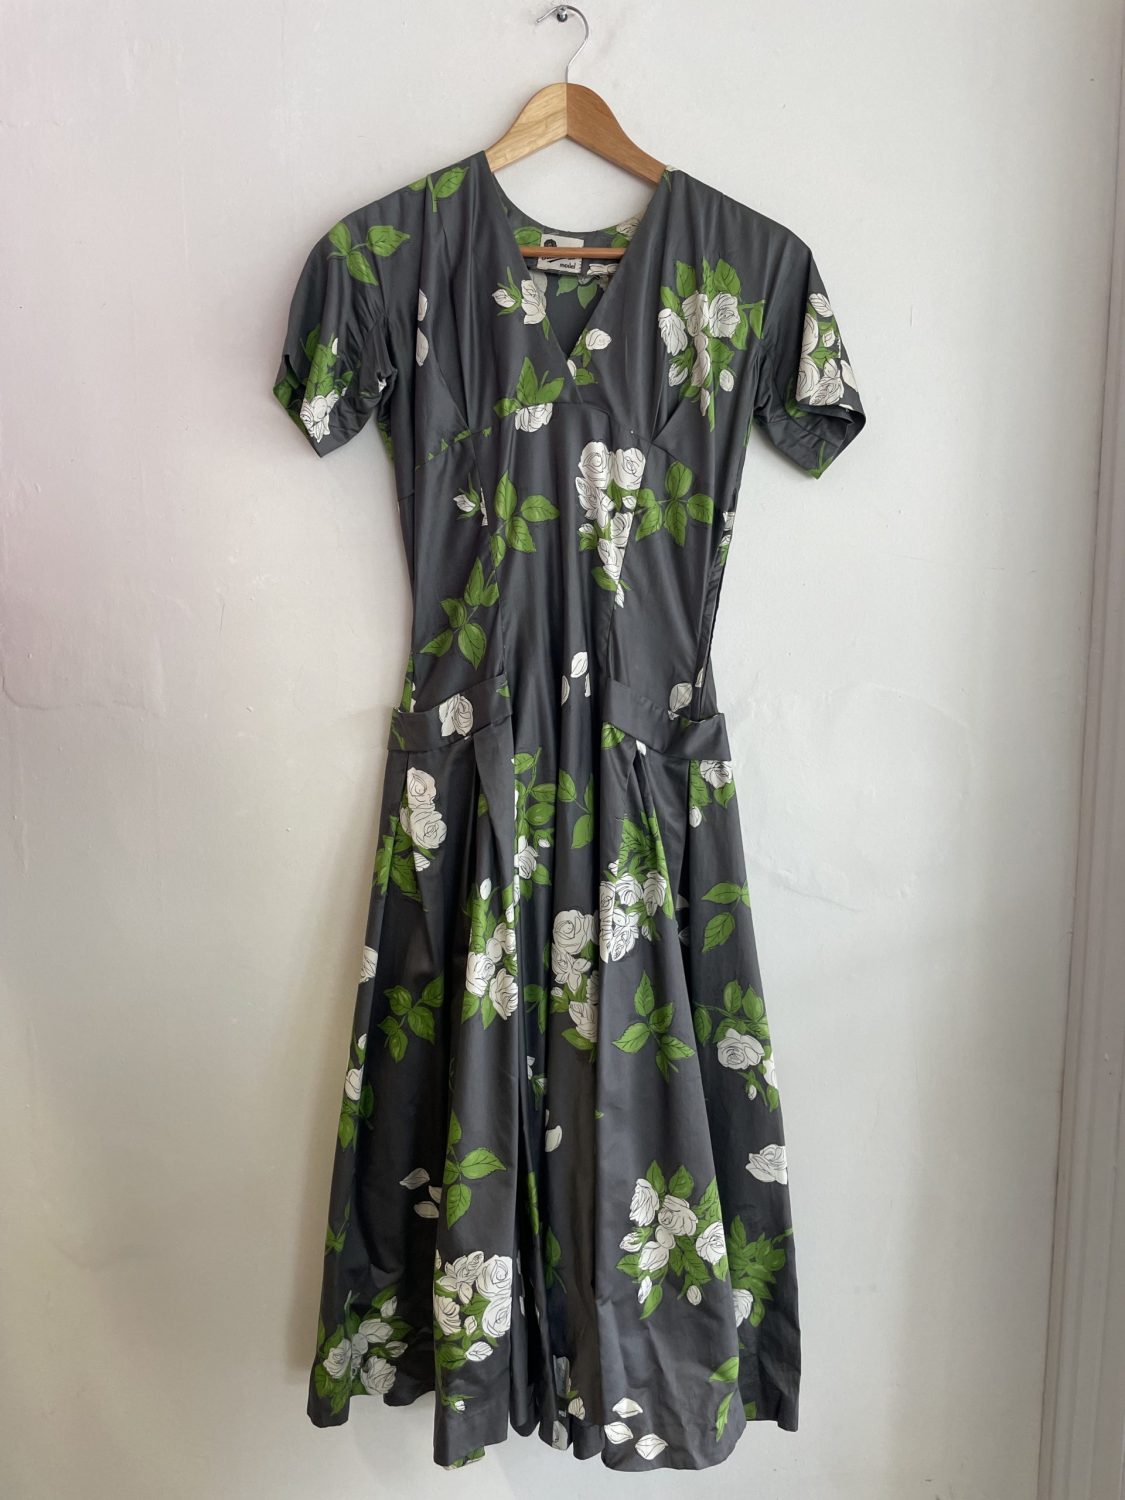 ORIGINAL GREY/GREEN POLISHED COTTON 50's DRESS WITH WHITE ROSES | Chaos ...